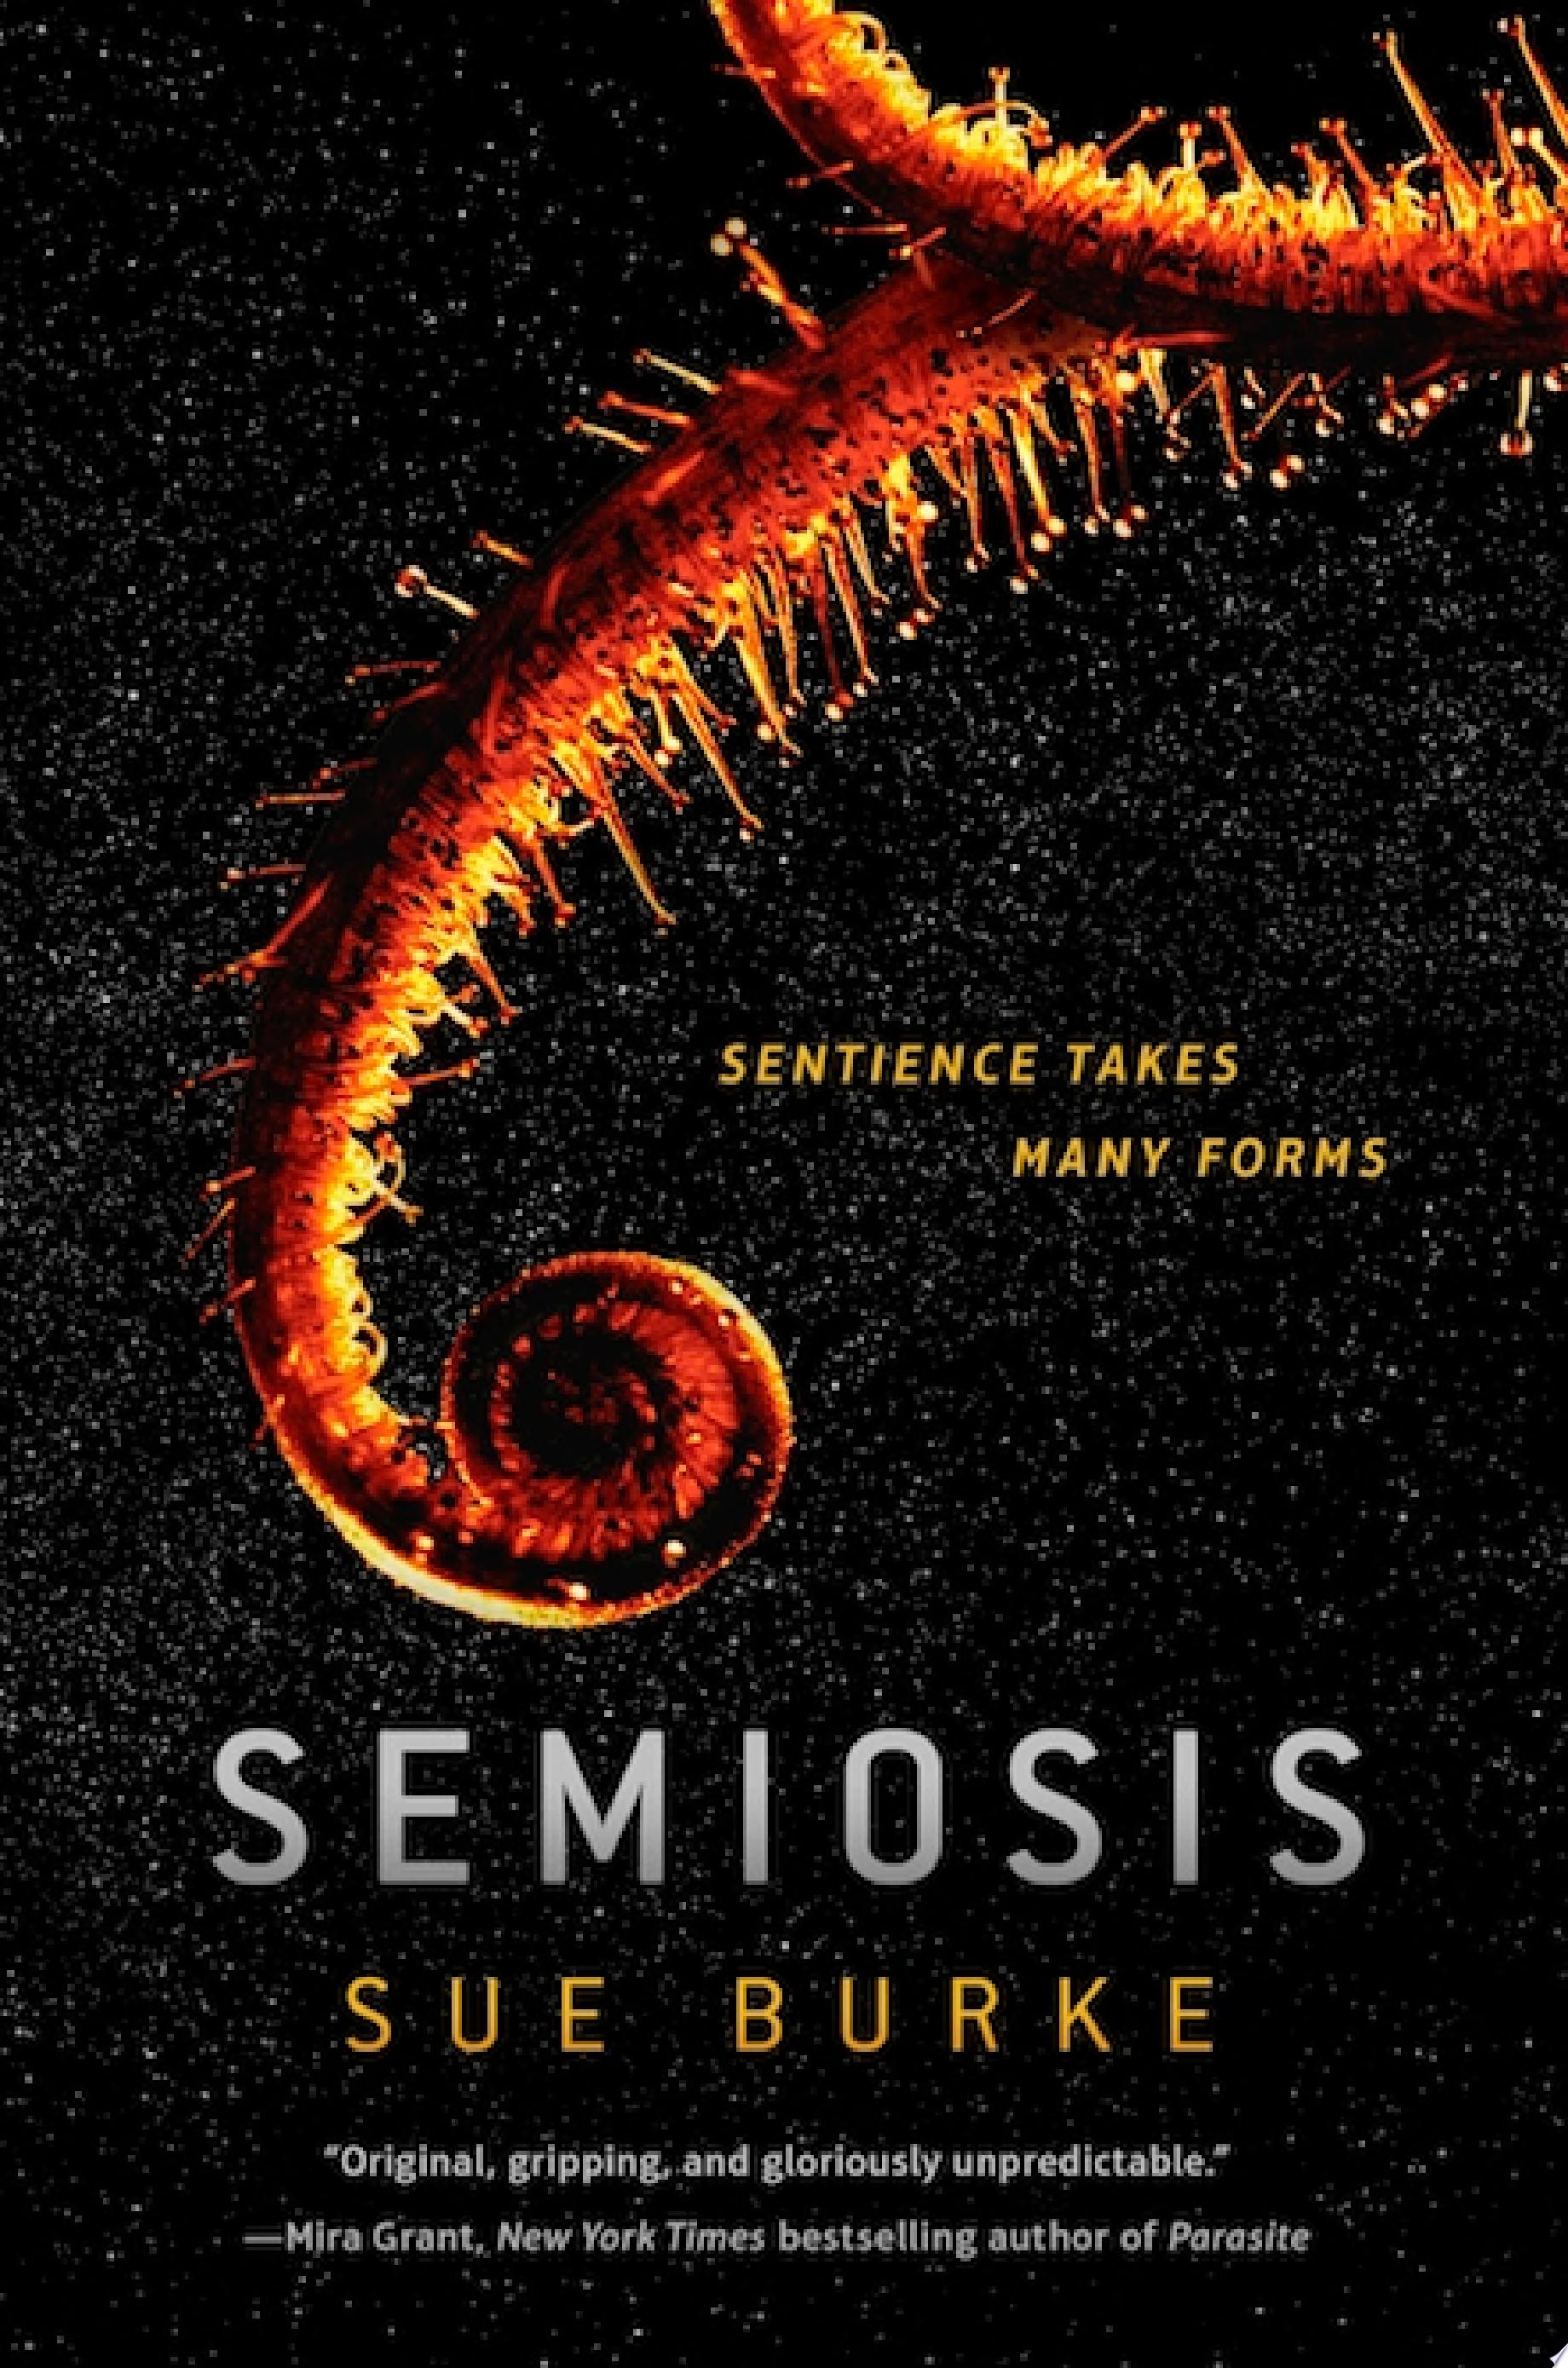 Image for "Semiosis"